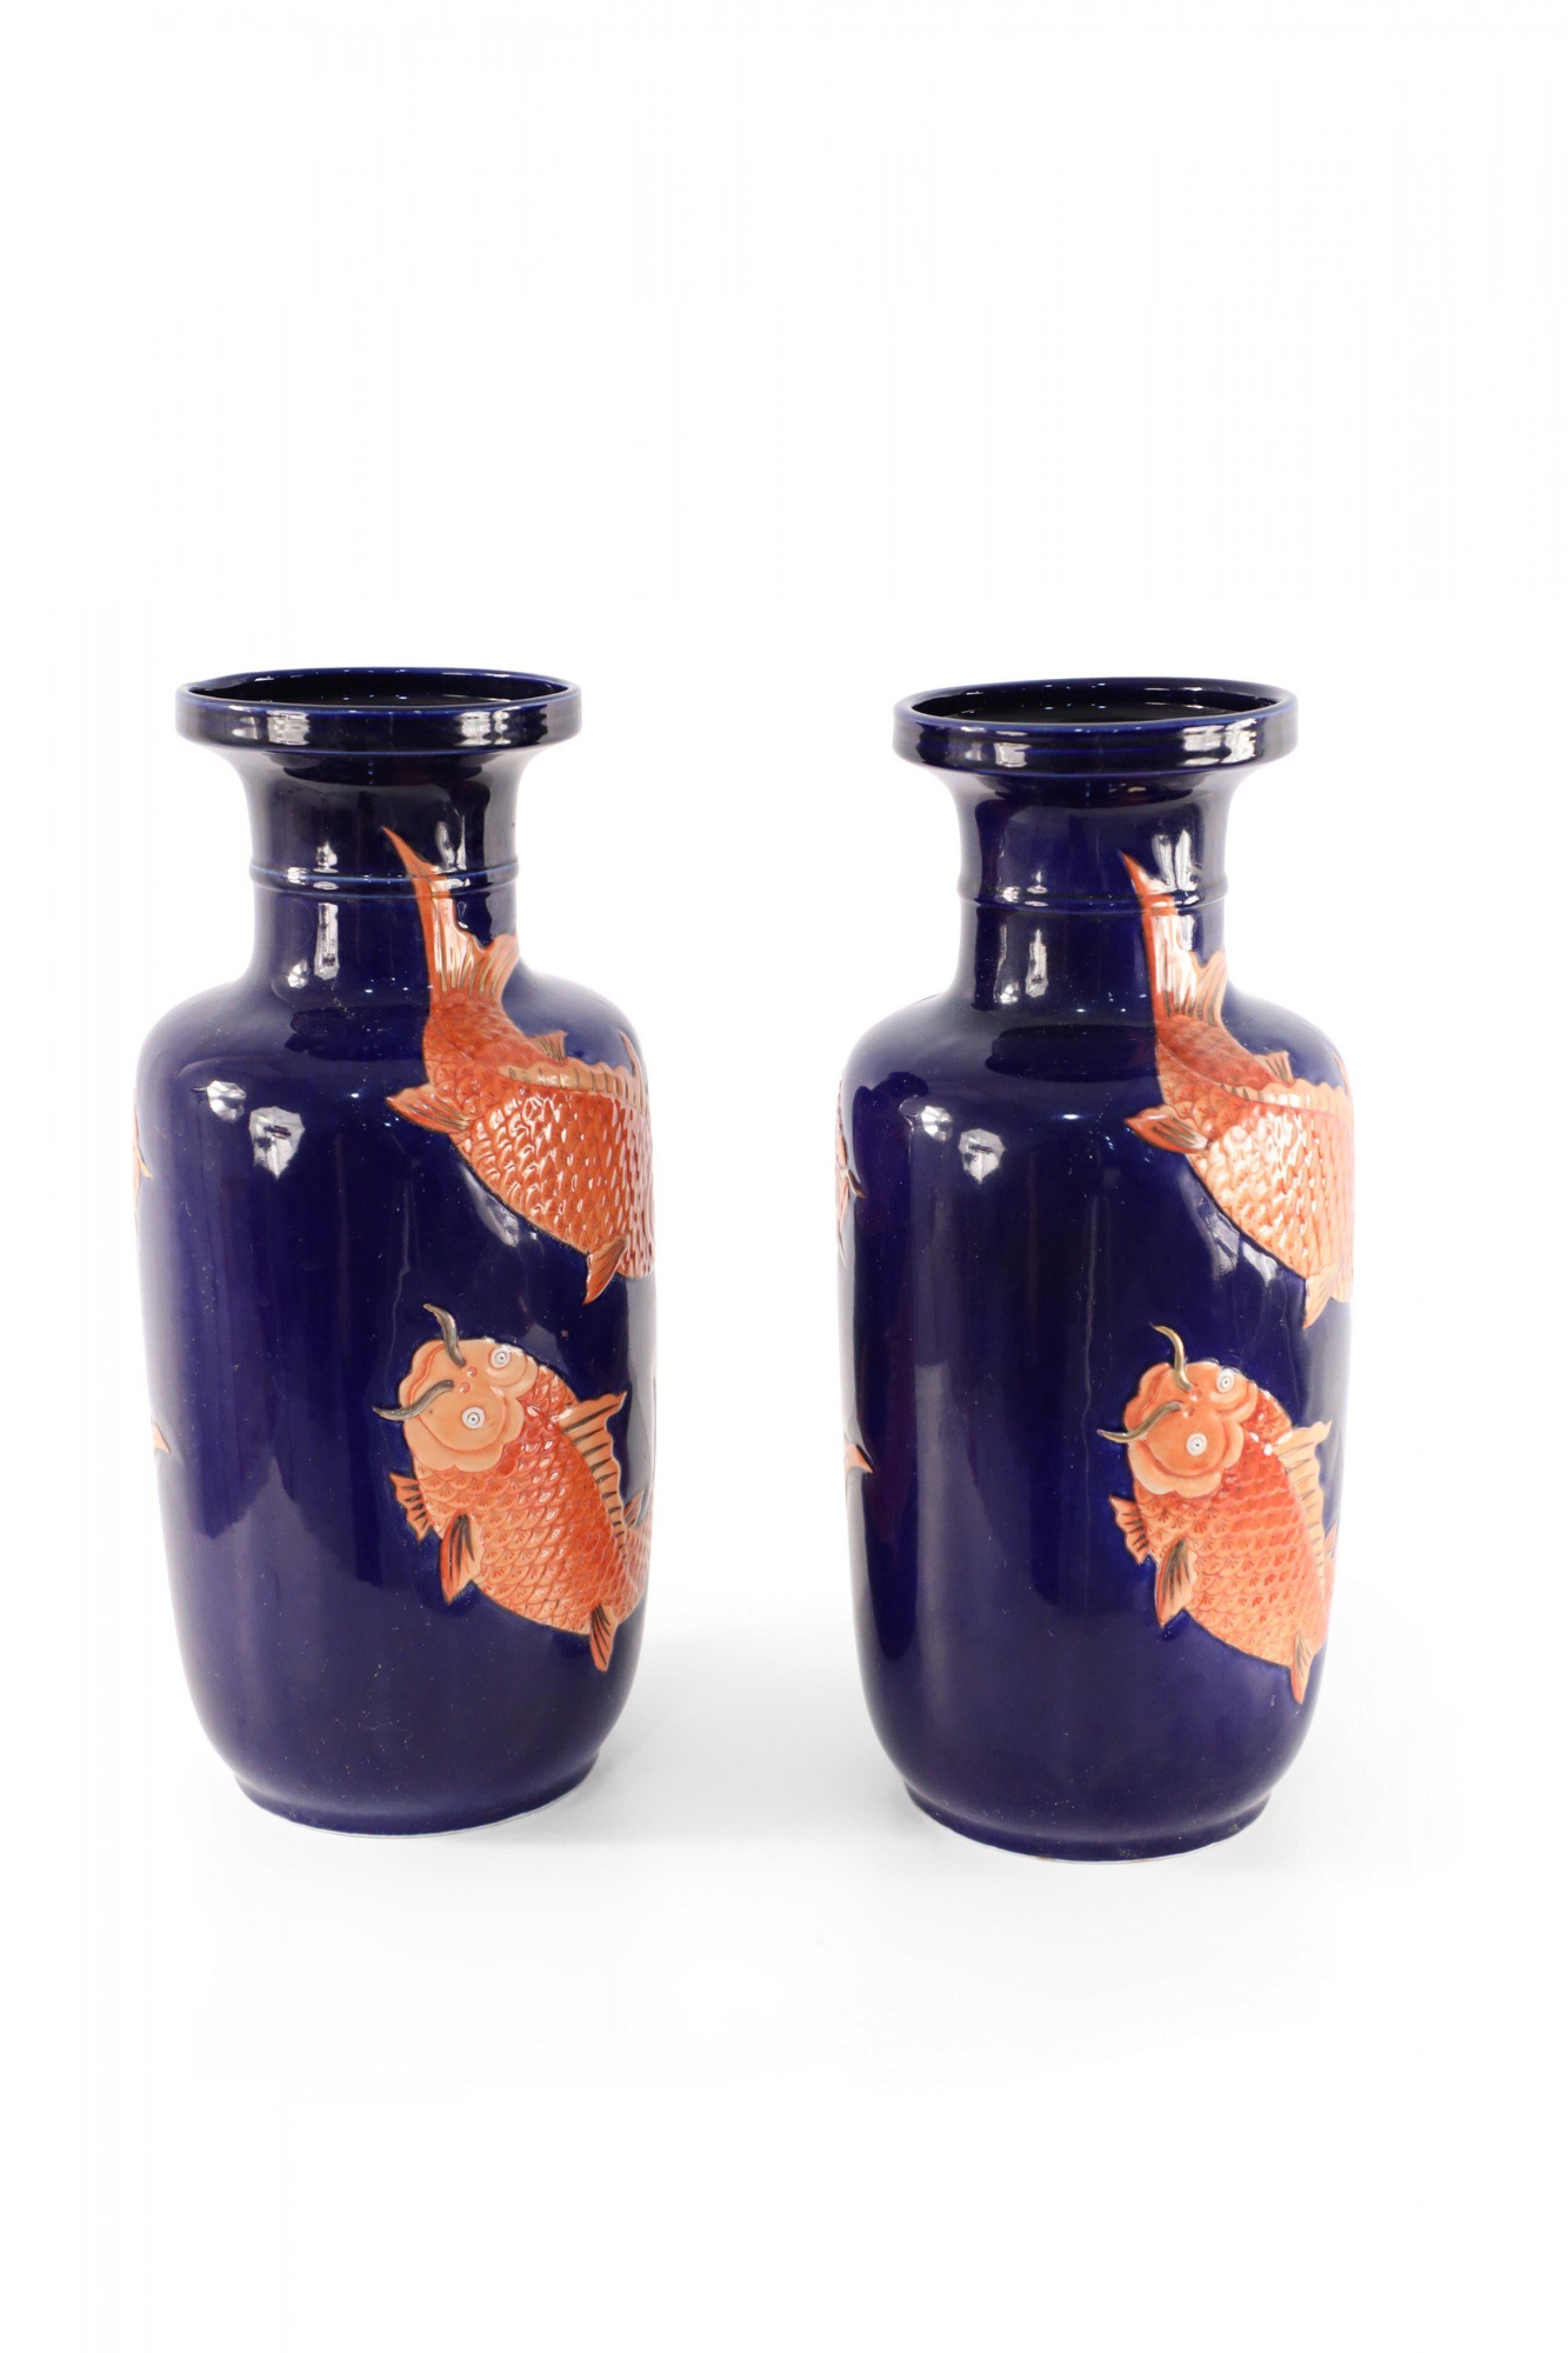 Pair of antique Chinese (mid 20th century) sleeve-shaped porcelain vases decorated with orange fish swimming around blue backgrounds, inspired by patterns from the Ming Dynasty (priced as pair).